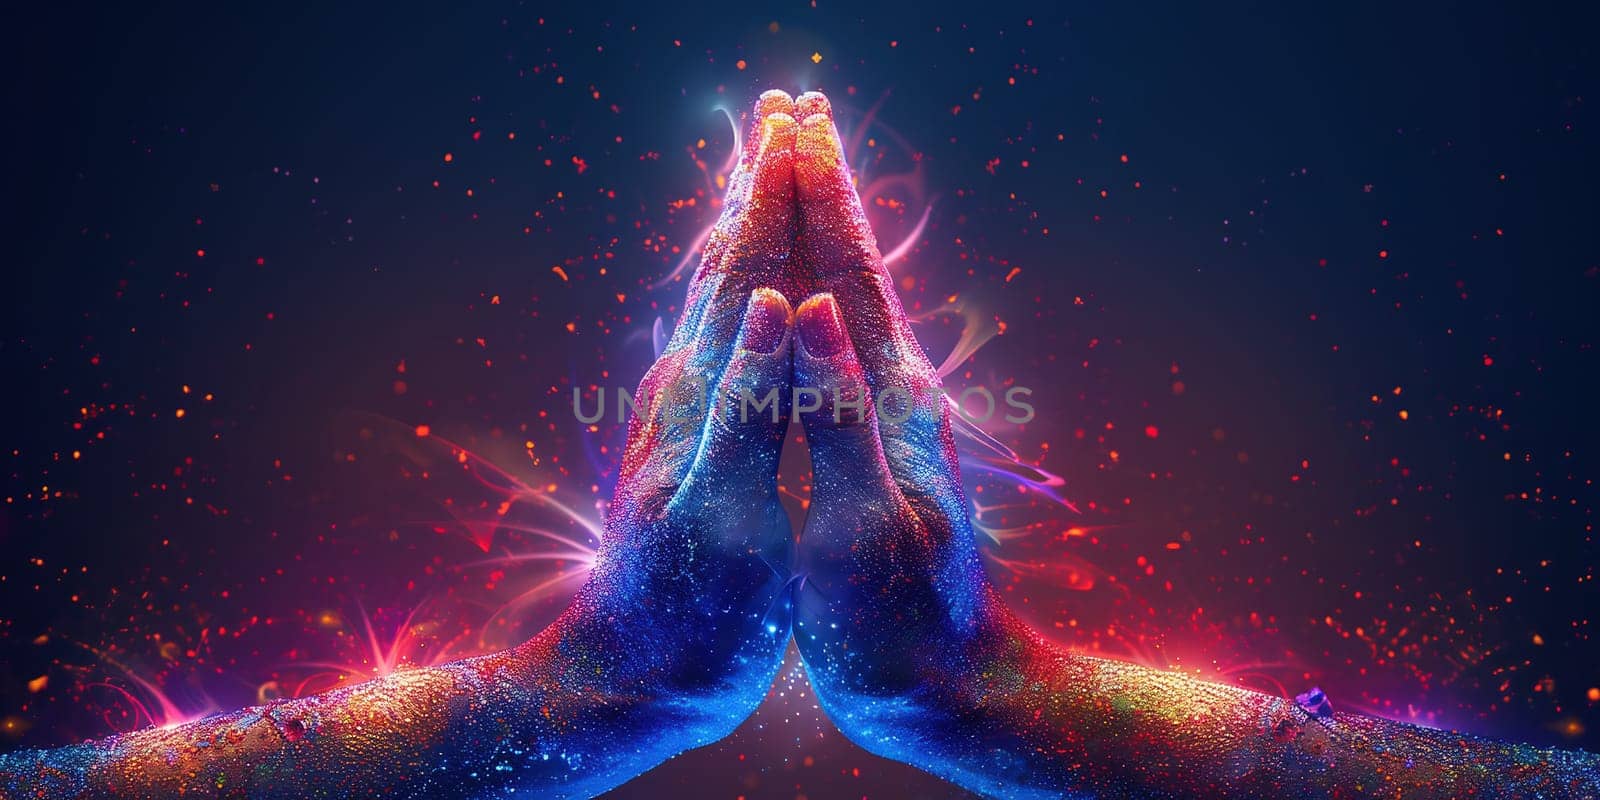 Supernatural Healing Energy - Male hands held parallel and reaching up with sparkling energy swirling upwards on a colorful background and plenty of copy space above. High quality photo